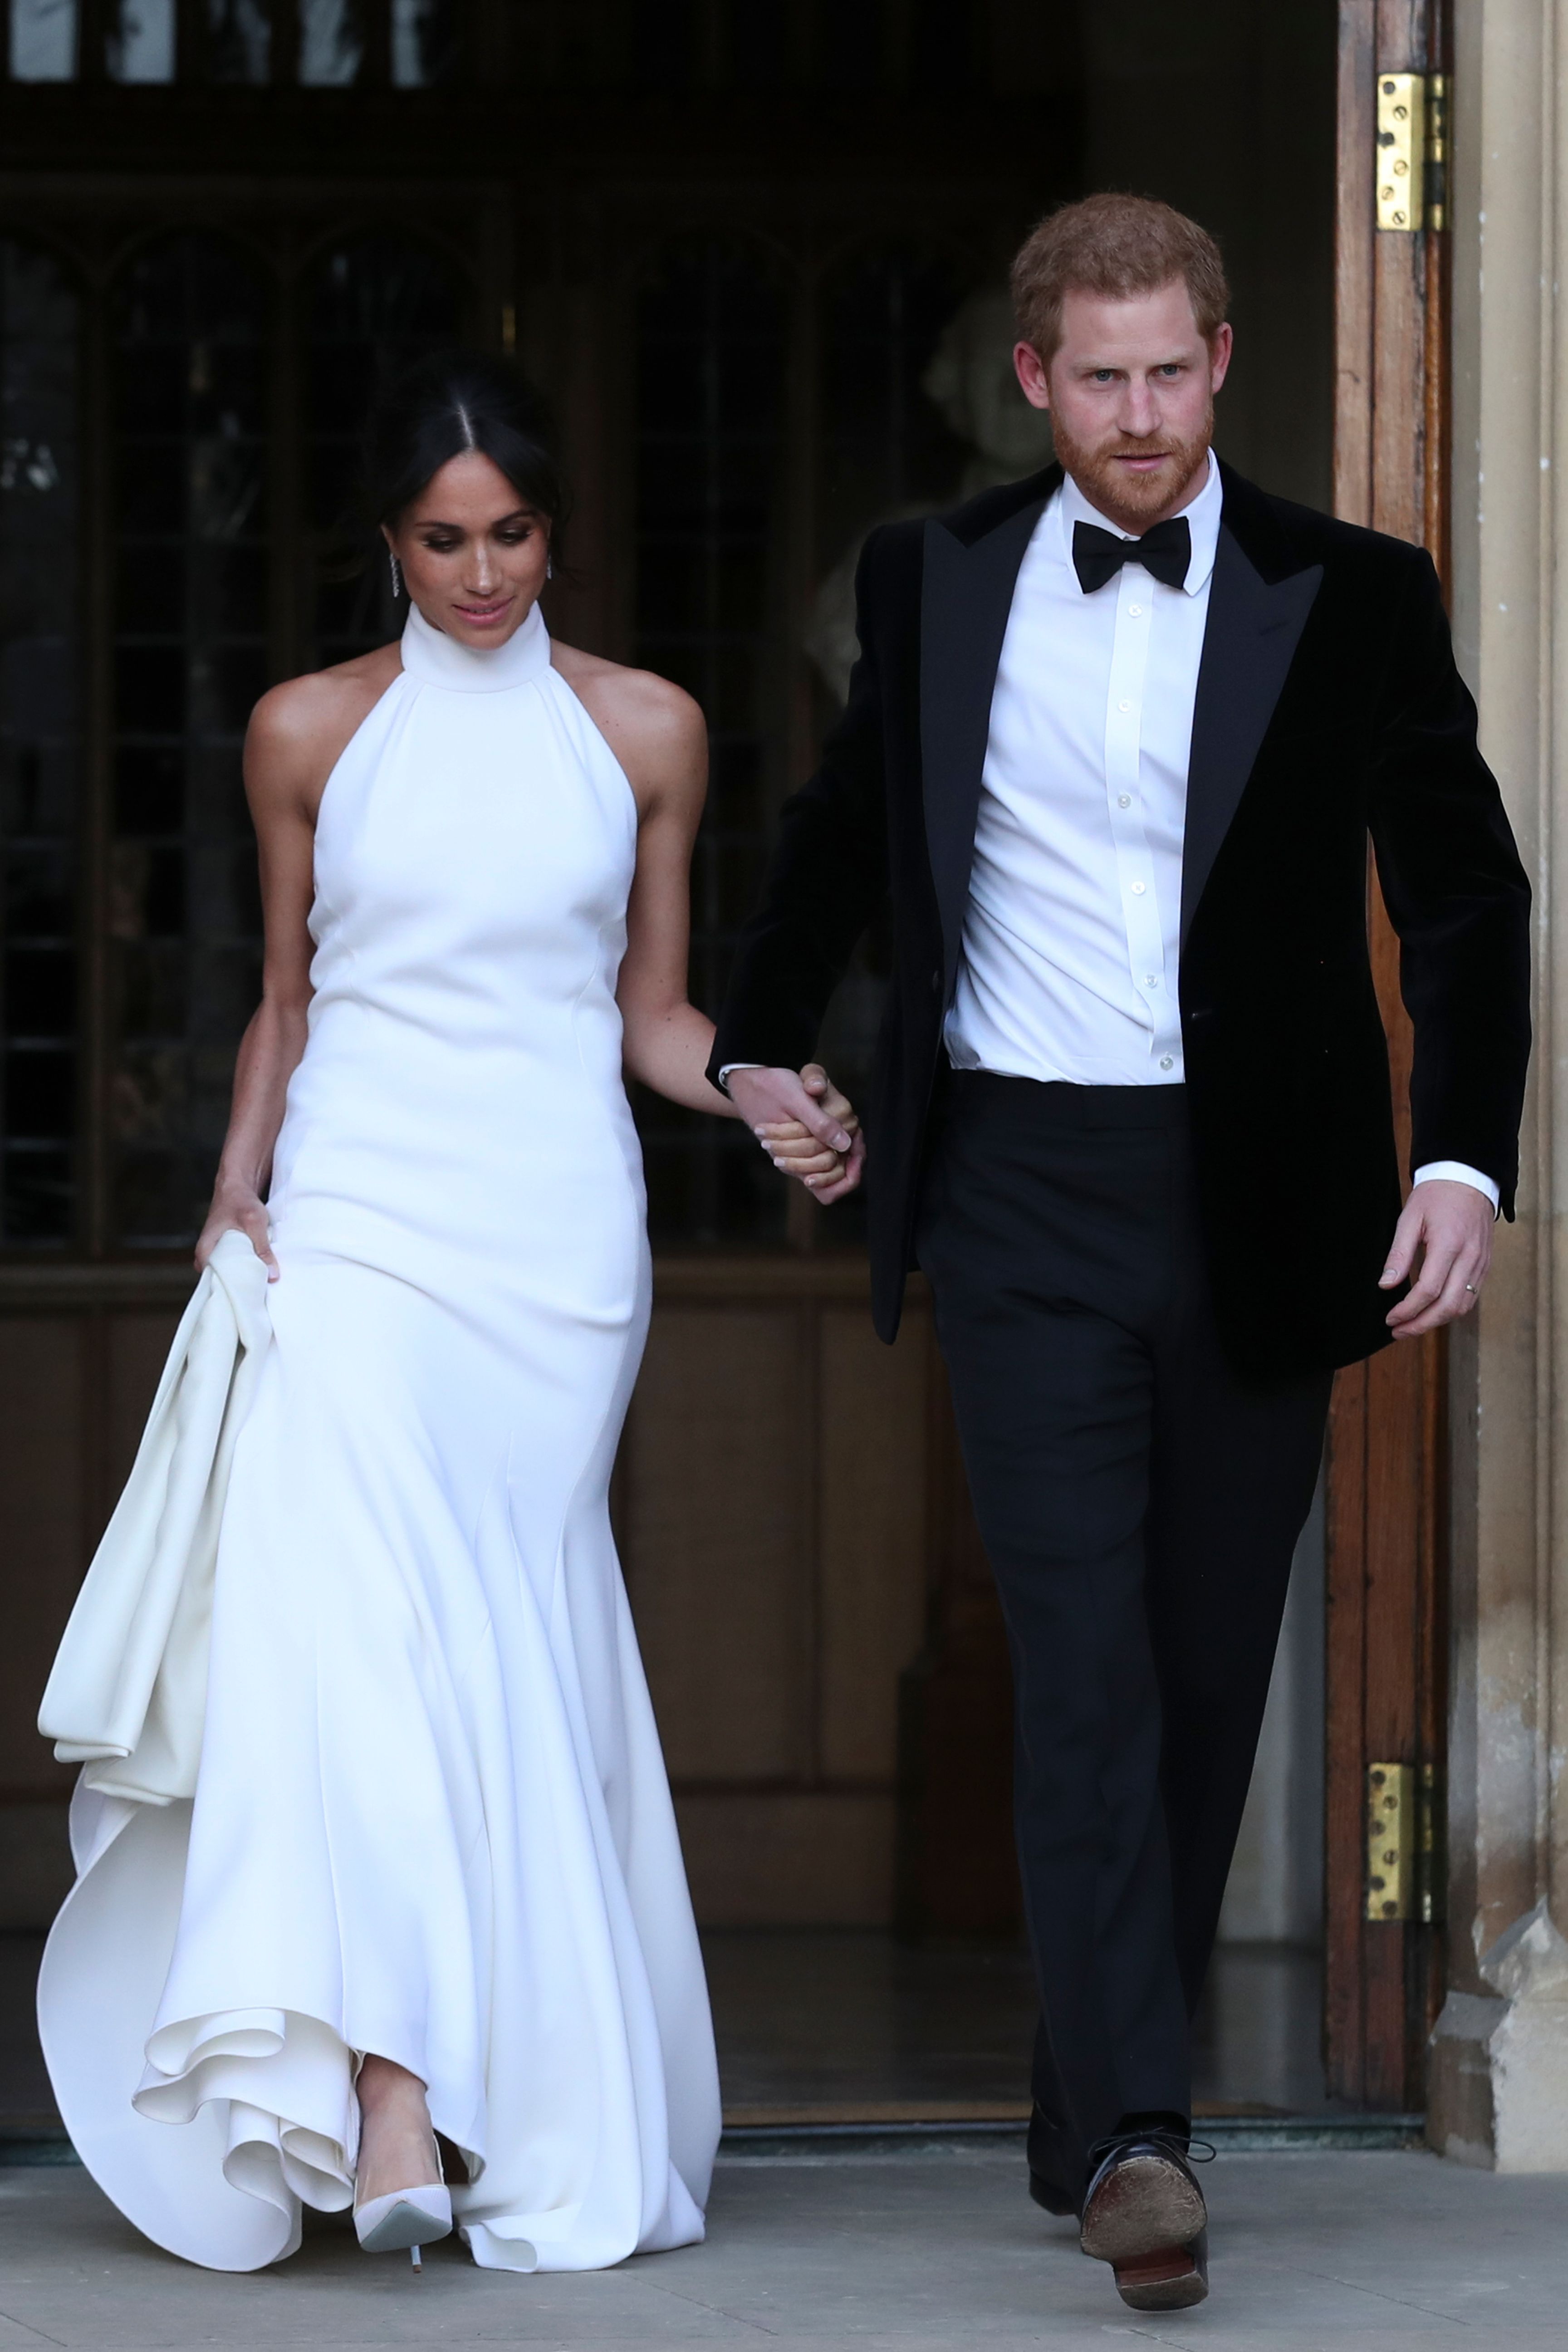 Prince Harry and Meghan Markle walking out of Windsor Castle and headed to evening reception